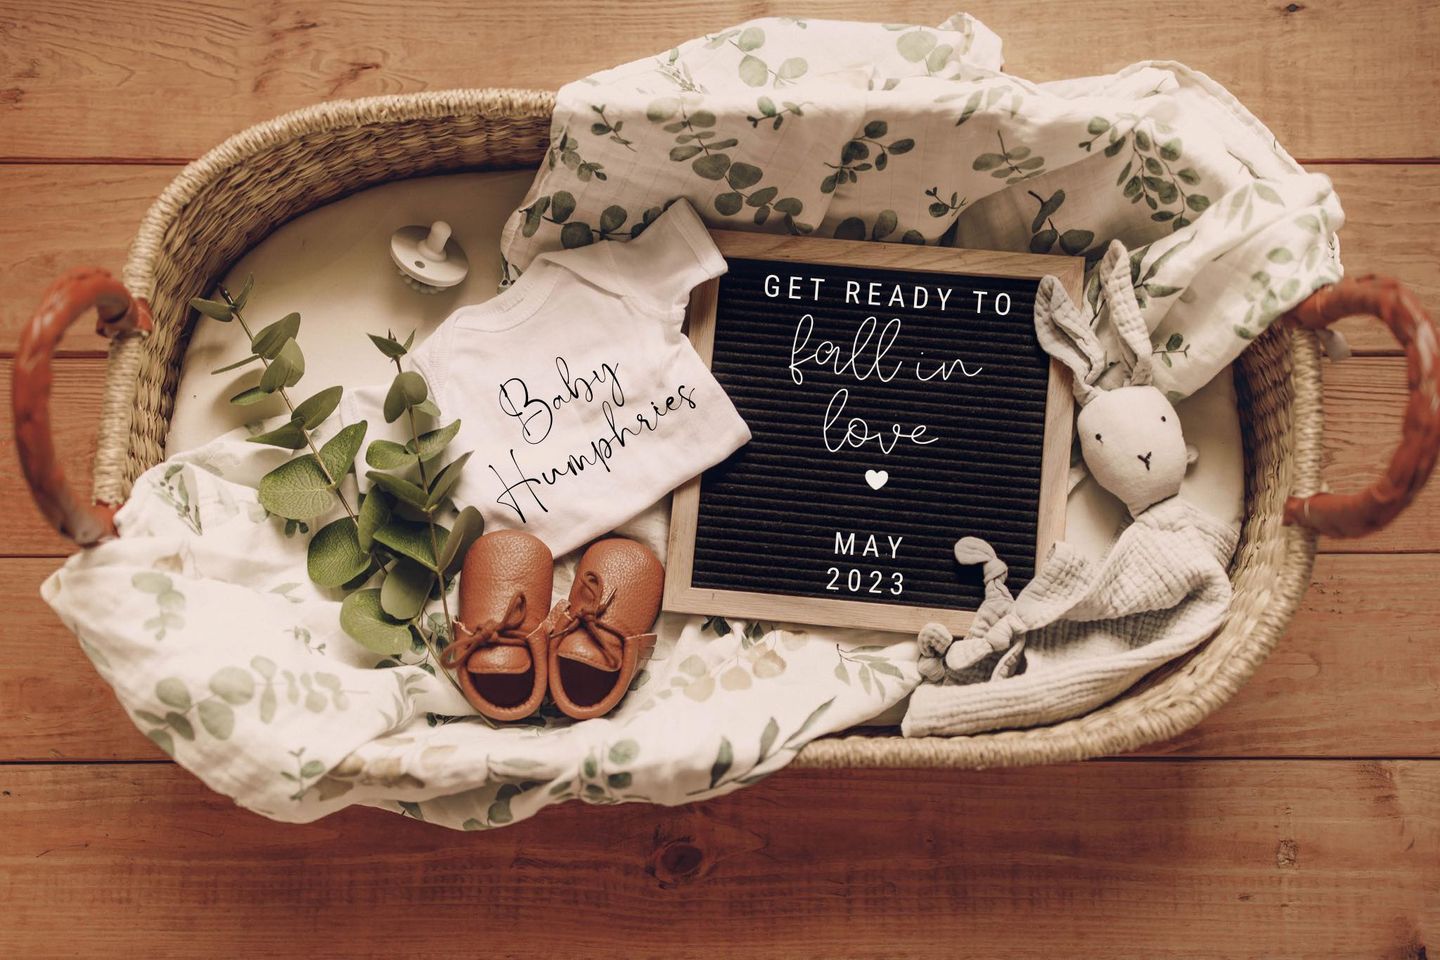 shelby lynn campbell humphries tr baby announcement features baby shoes, baby blanket, stuffed rabbit, and chalkboard making the announcement all in a straw basket